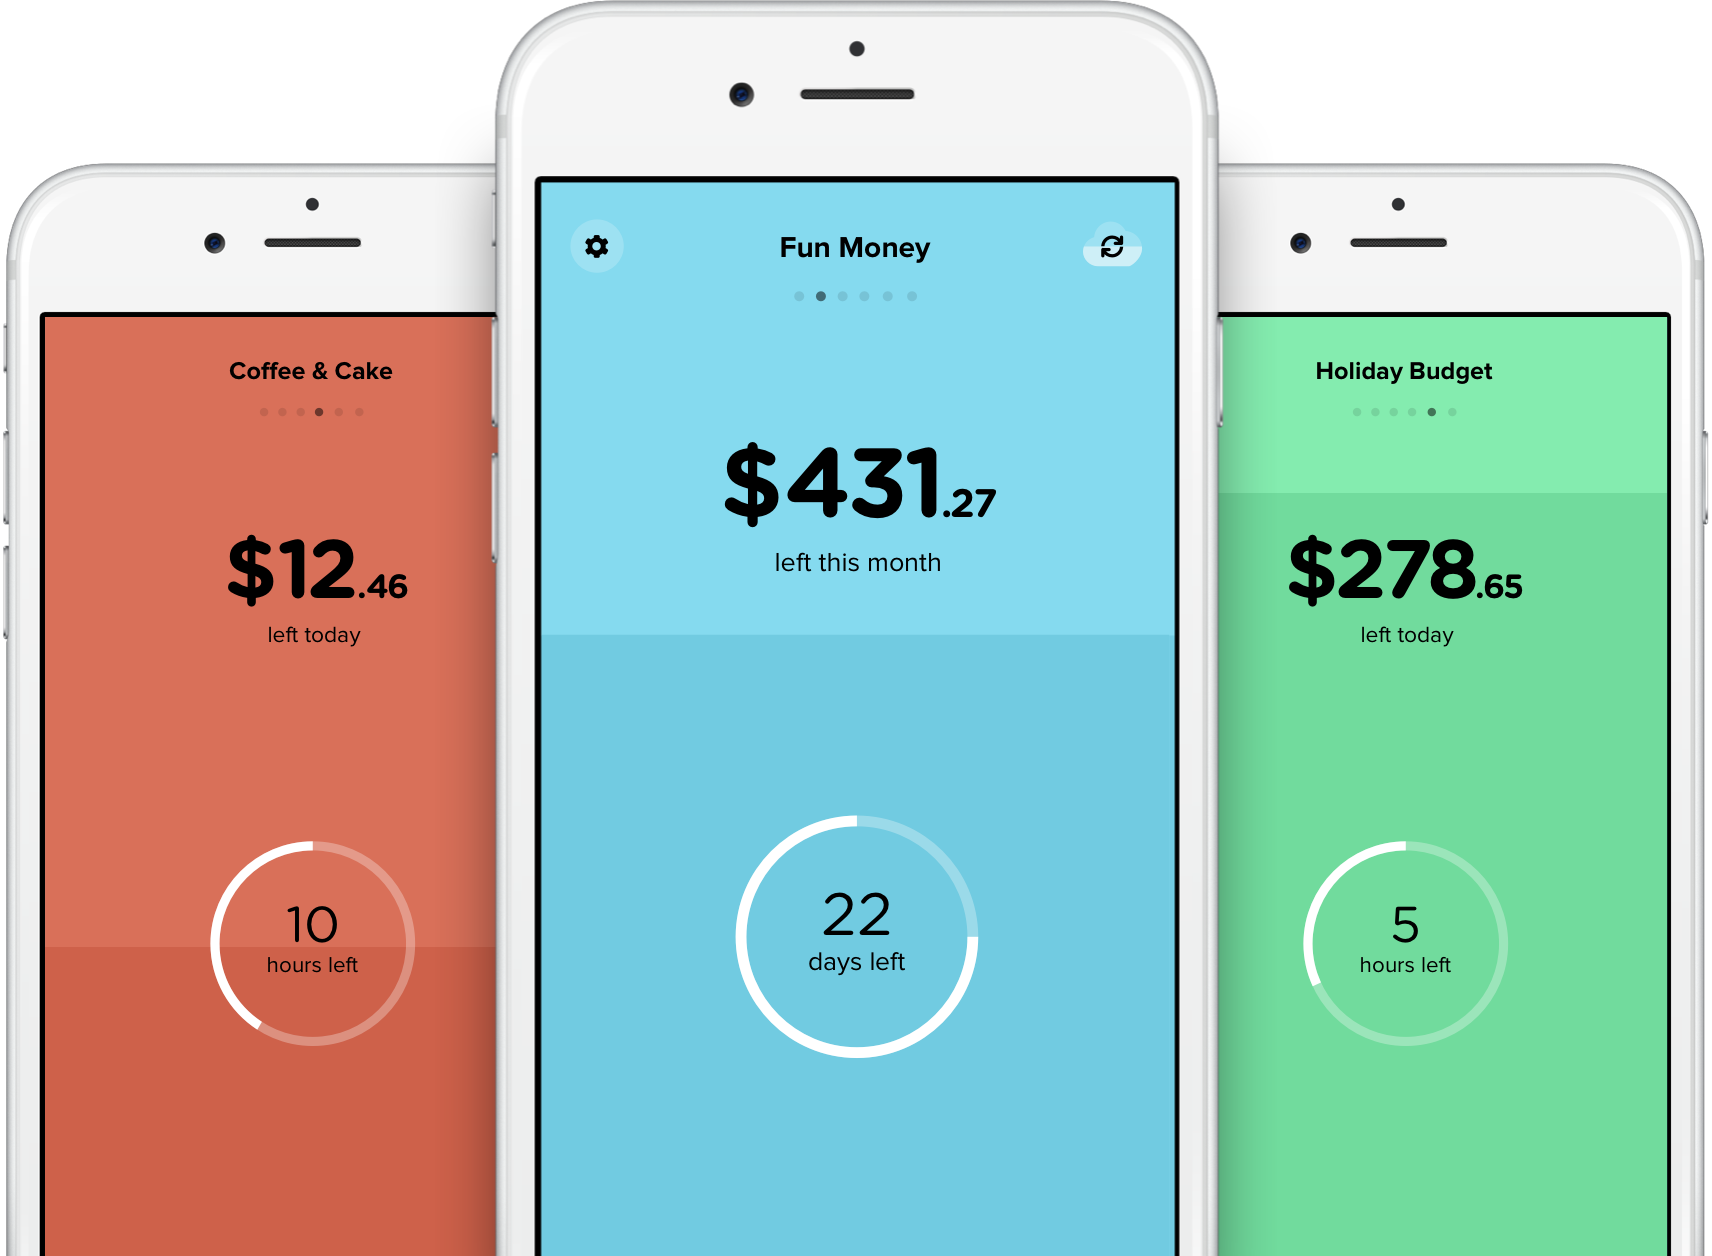 The Pennies iPhone app allows you to track multiple personal budgets